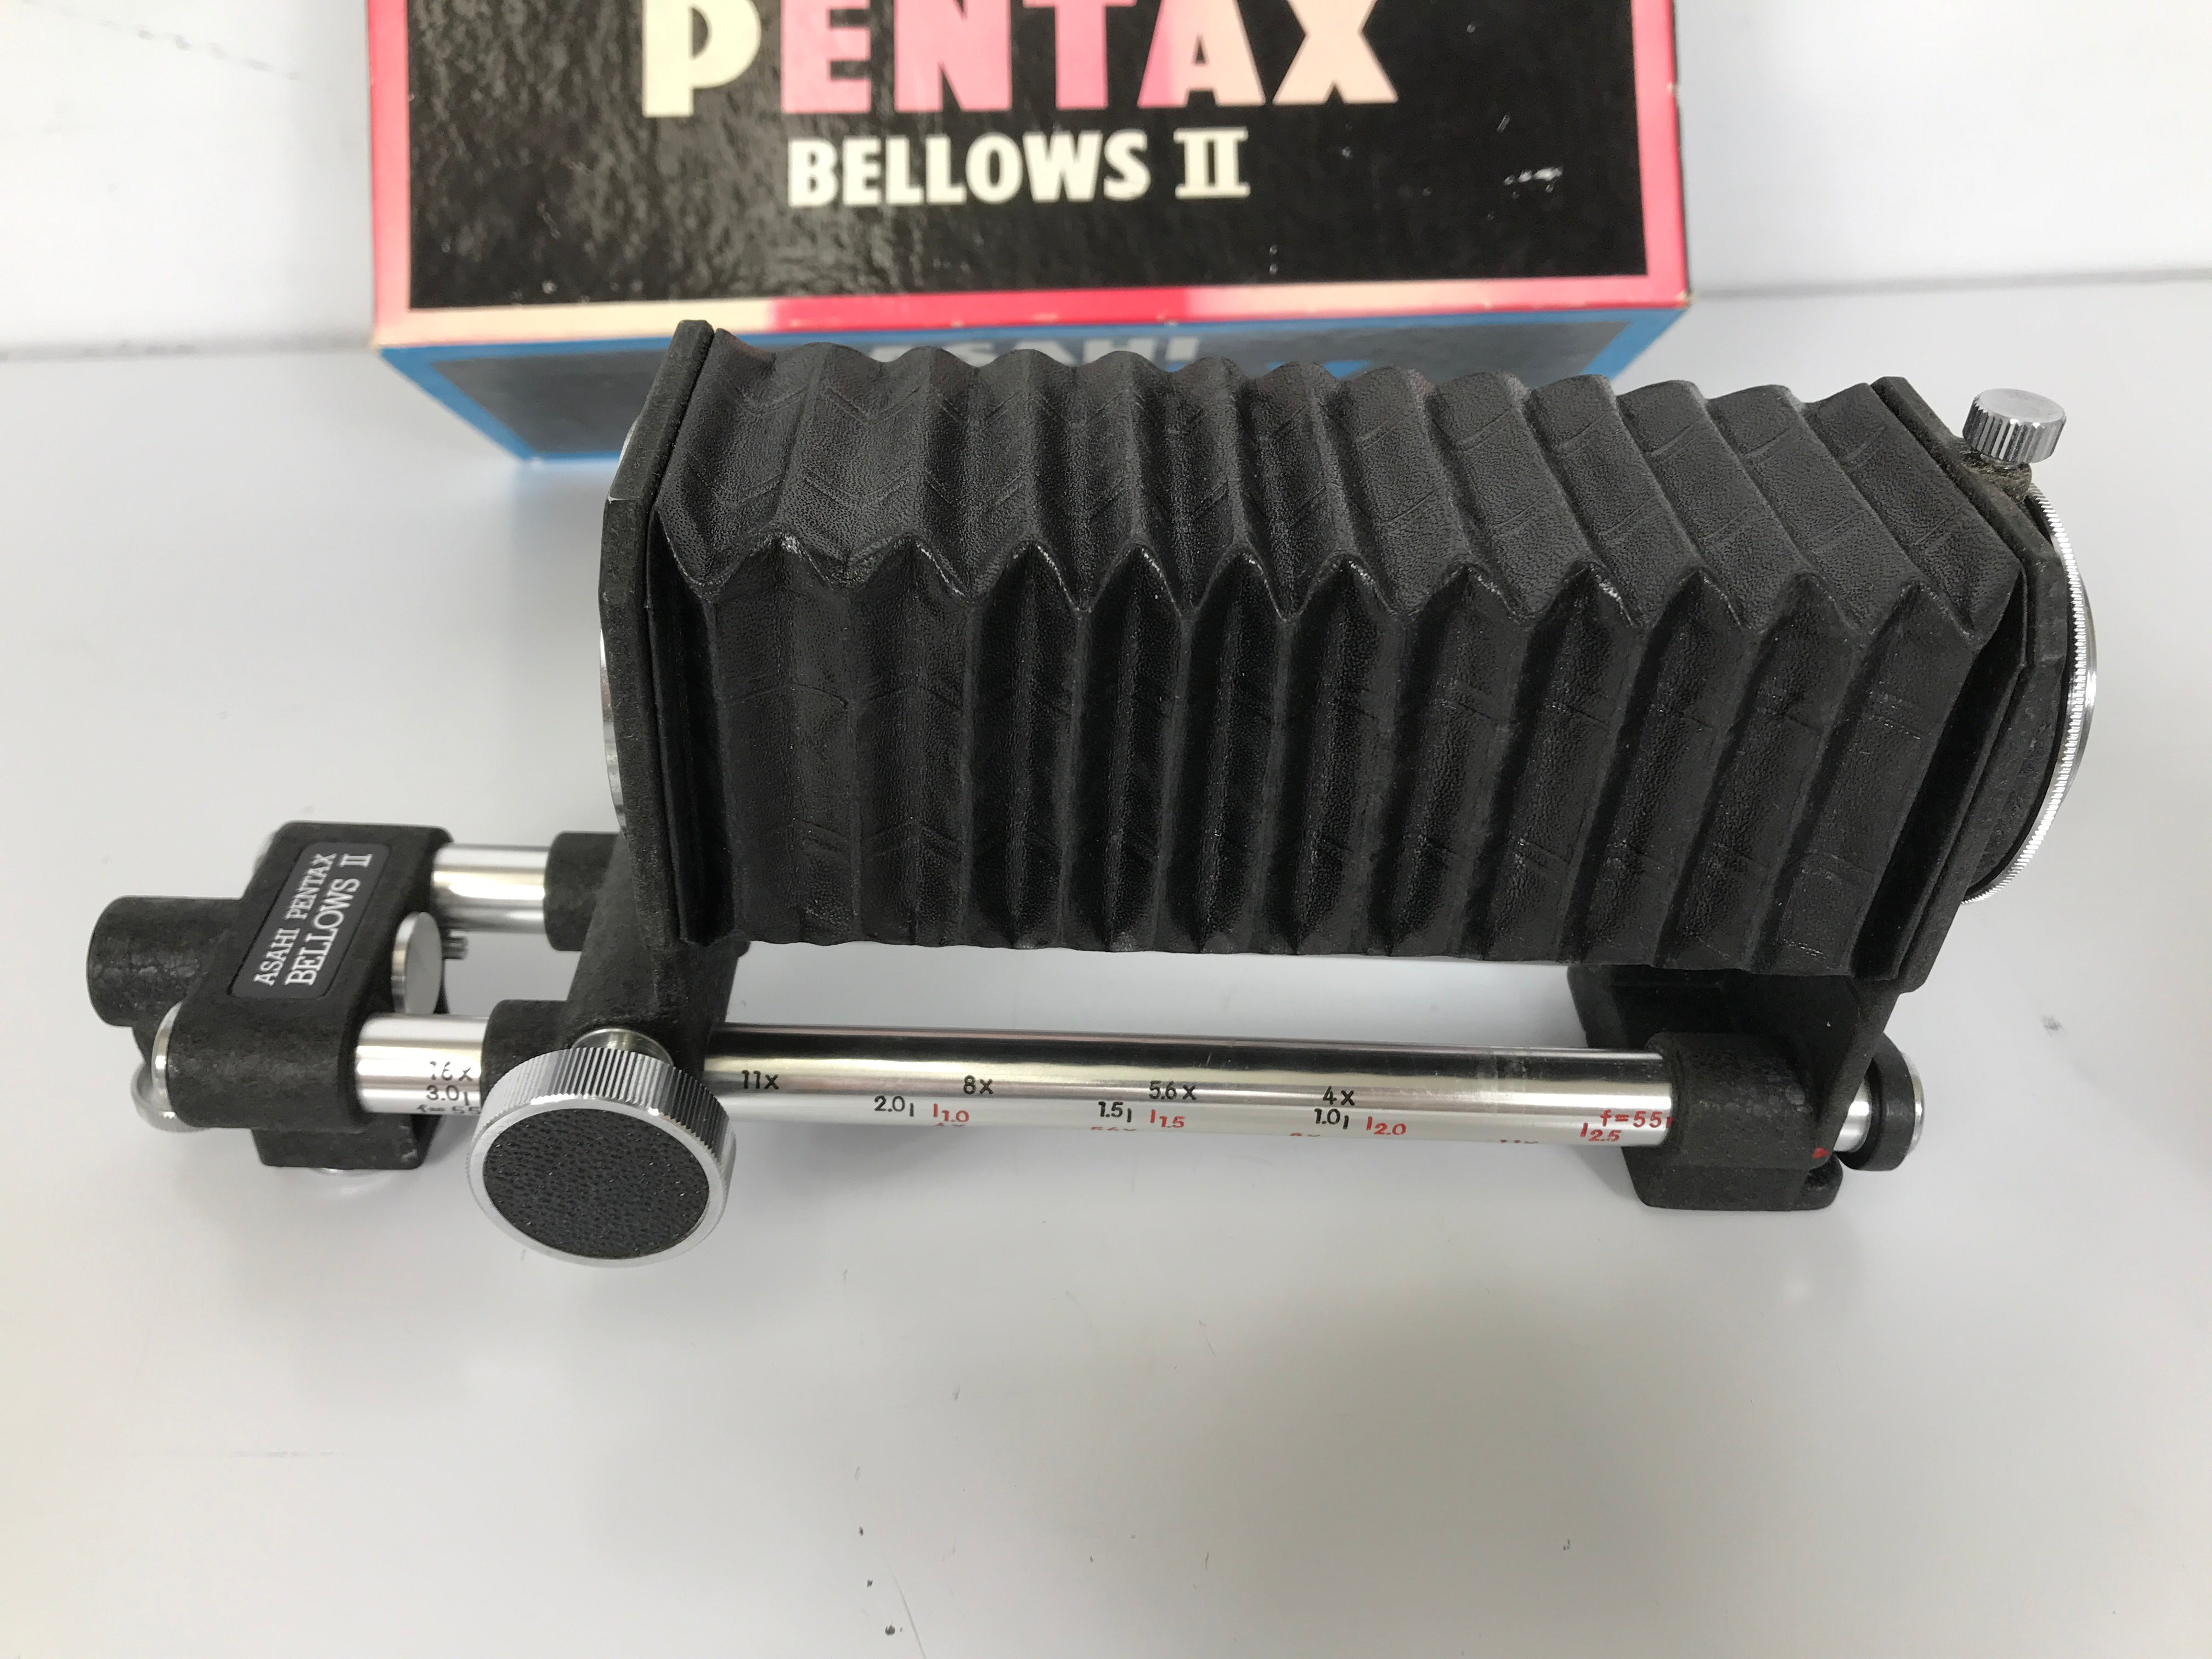 Asahi Pentax Bellows II and 35mm Slide Copier Attachment for Vintage Photography